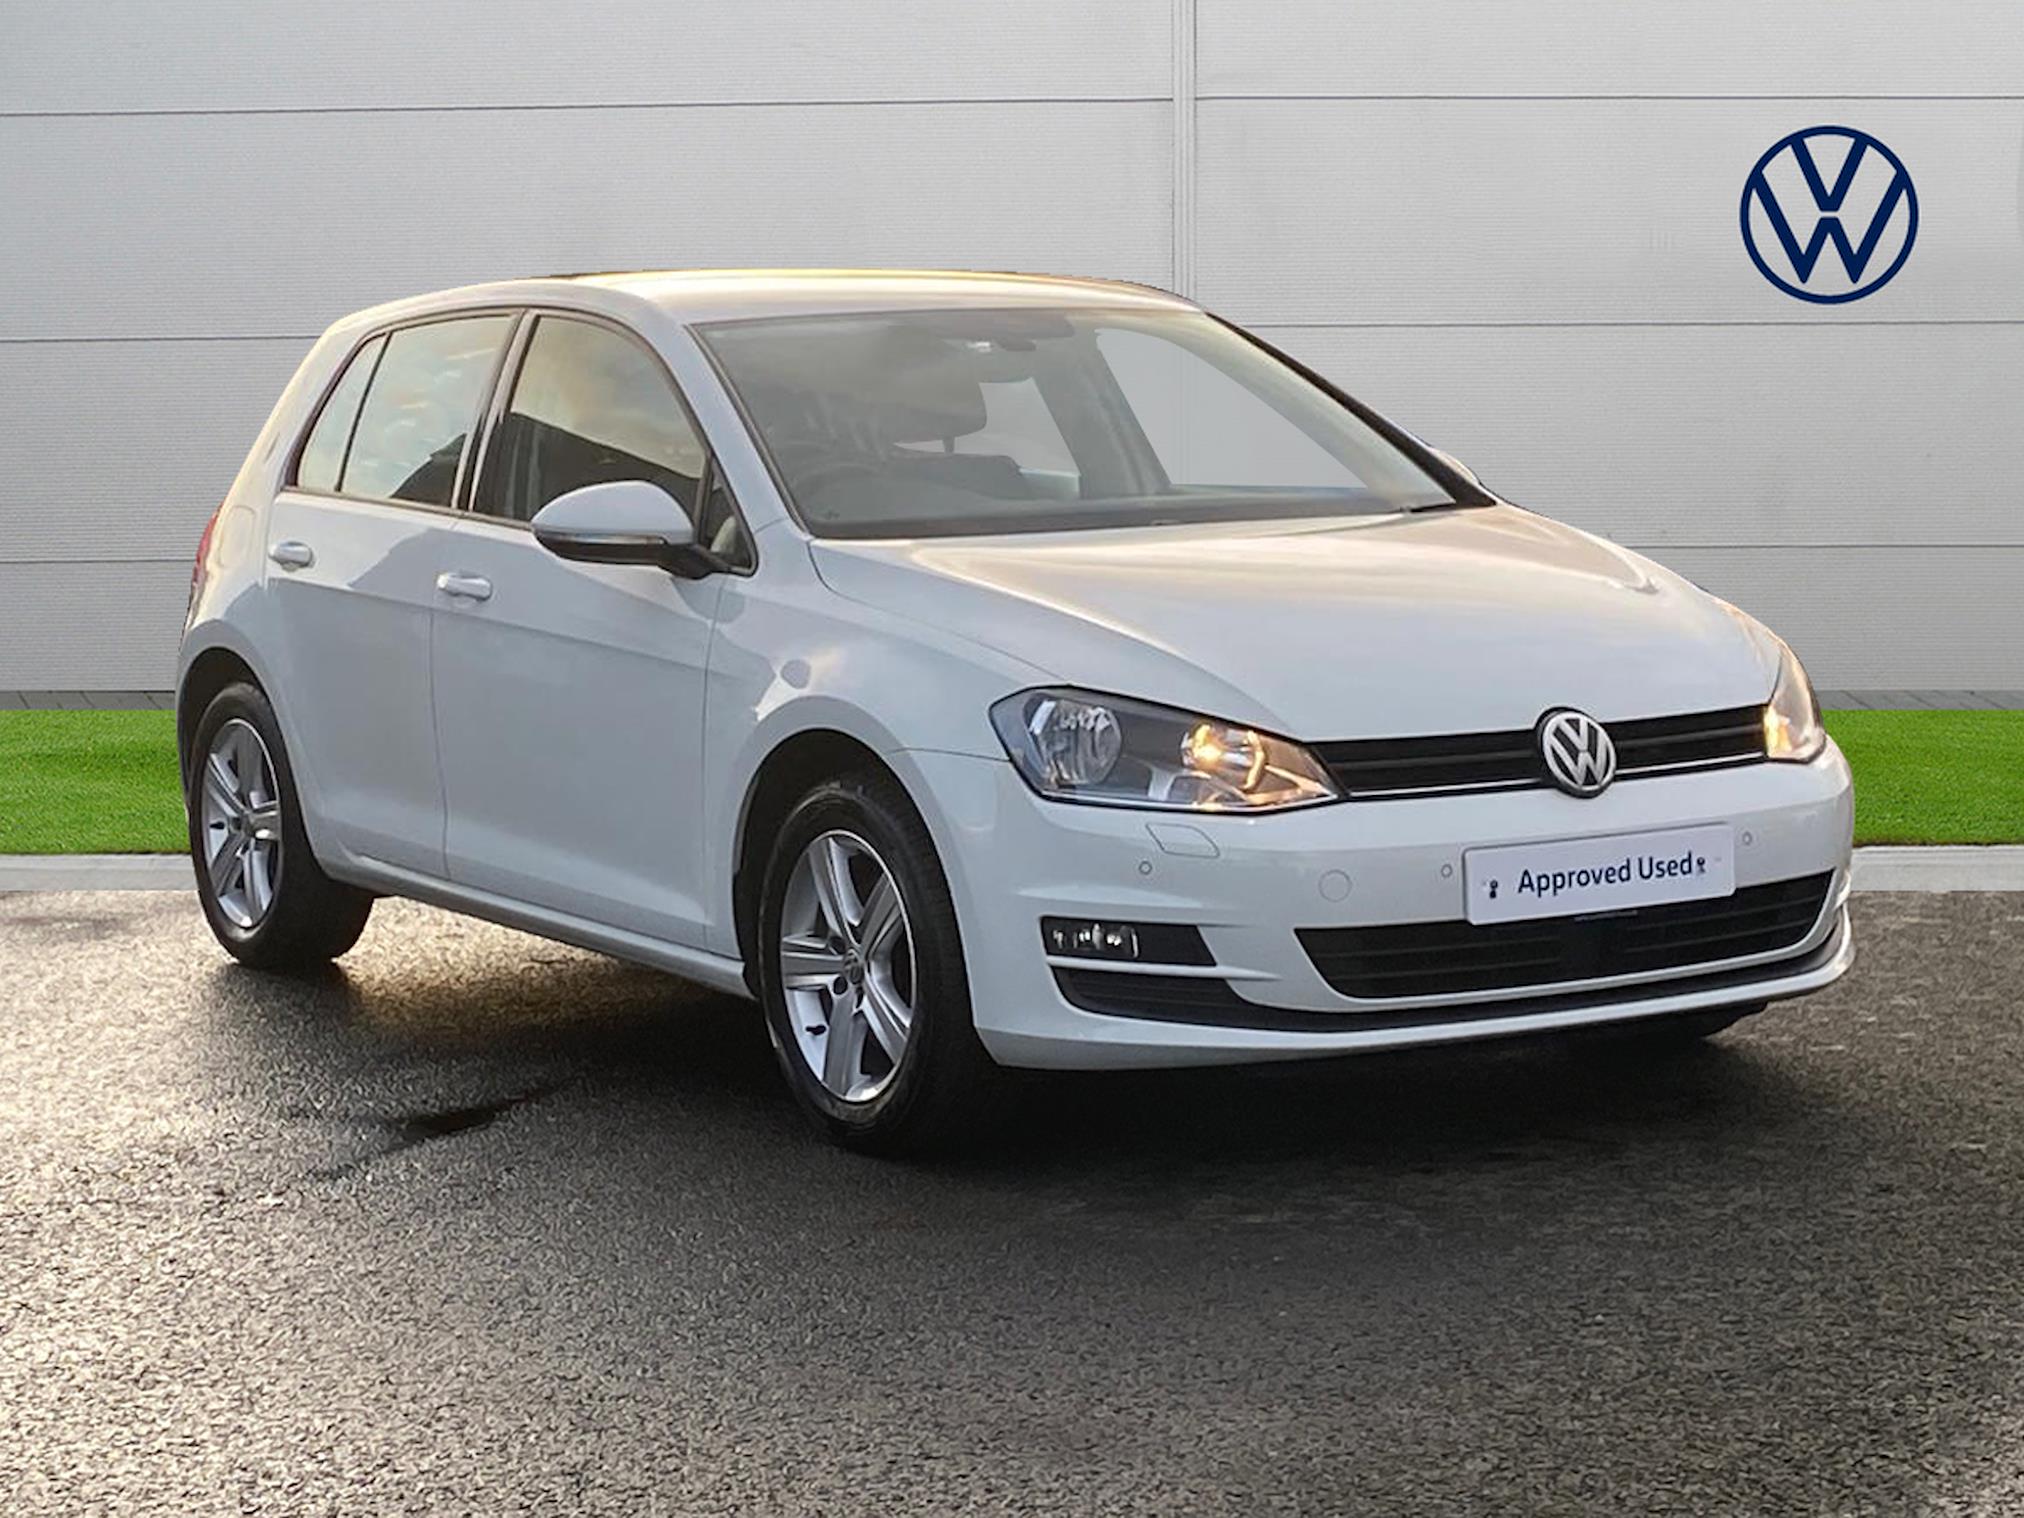 Used VOLKSWAGEN GOLF 1.4 Tsi 125 Match Edition 5Dr 2016 | Lookers